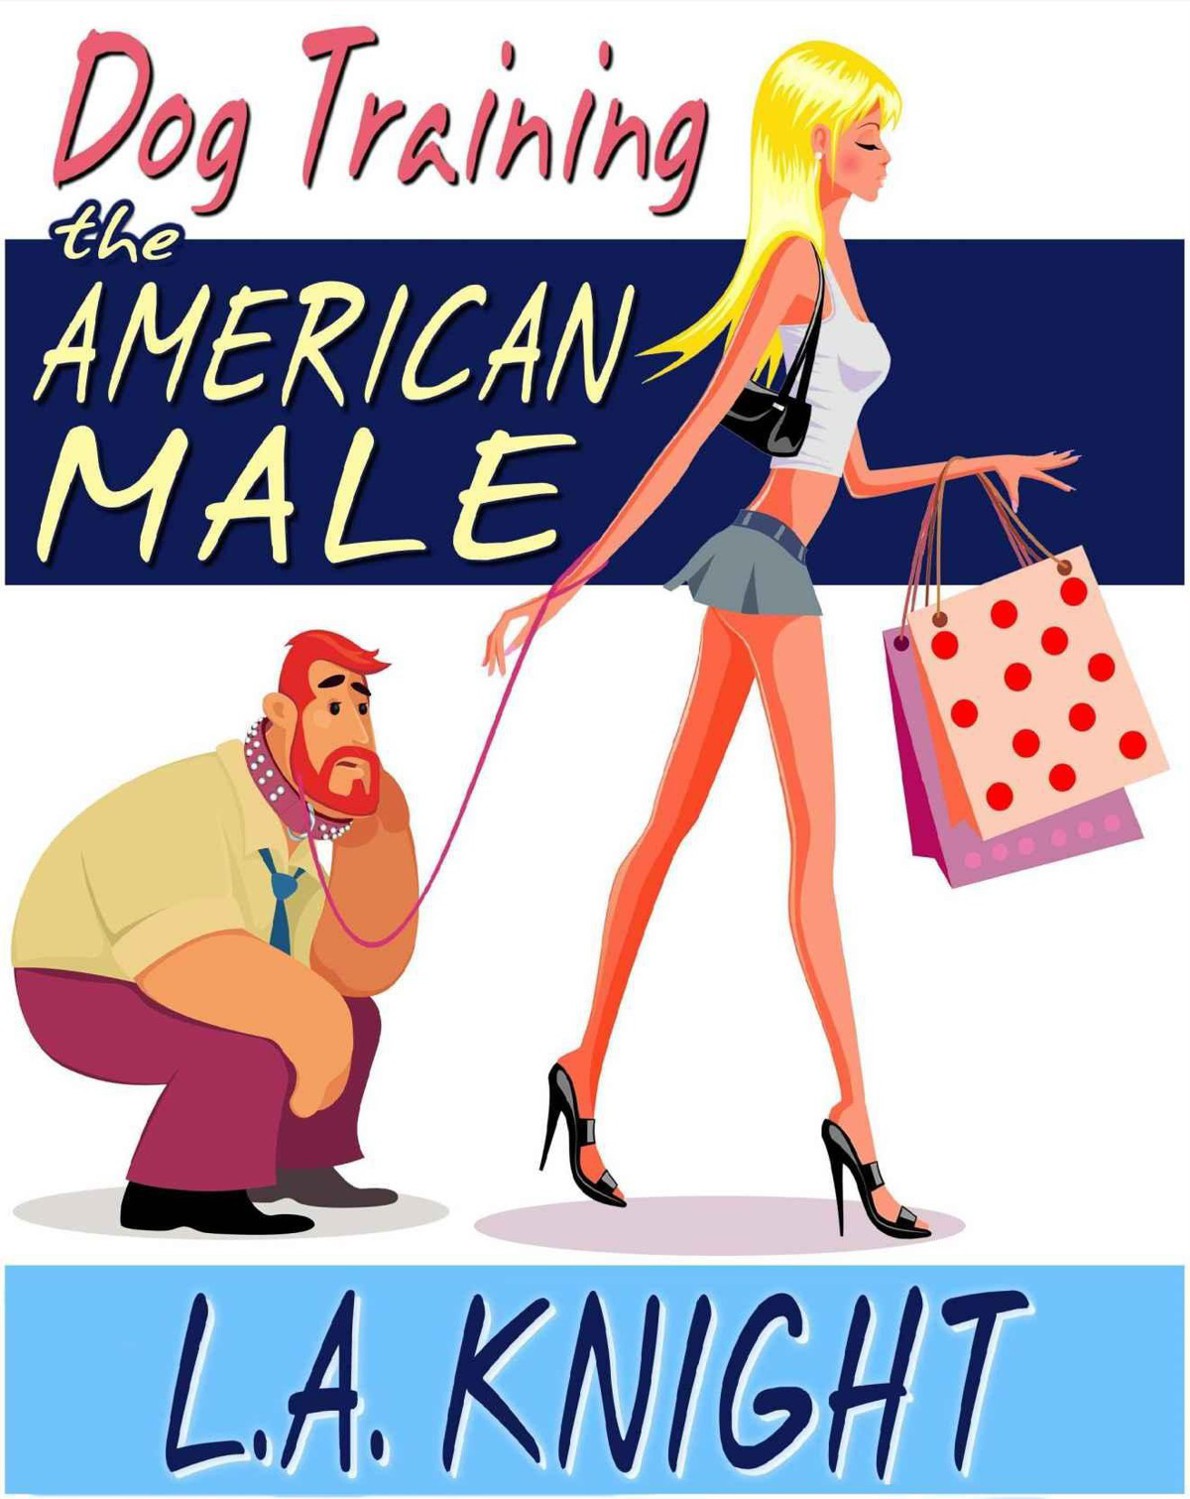 Dog Training The American Male by L. A. Knight